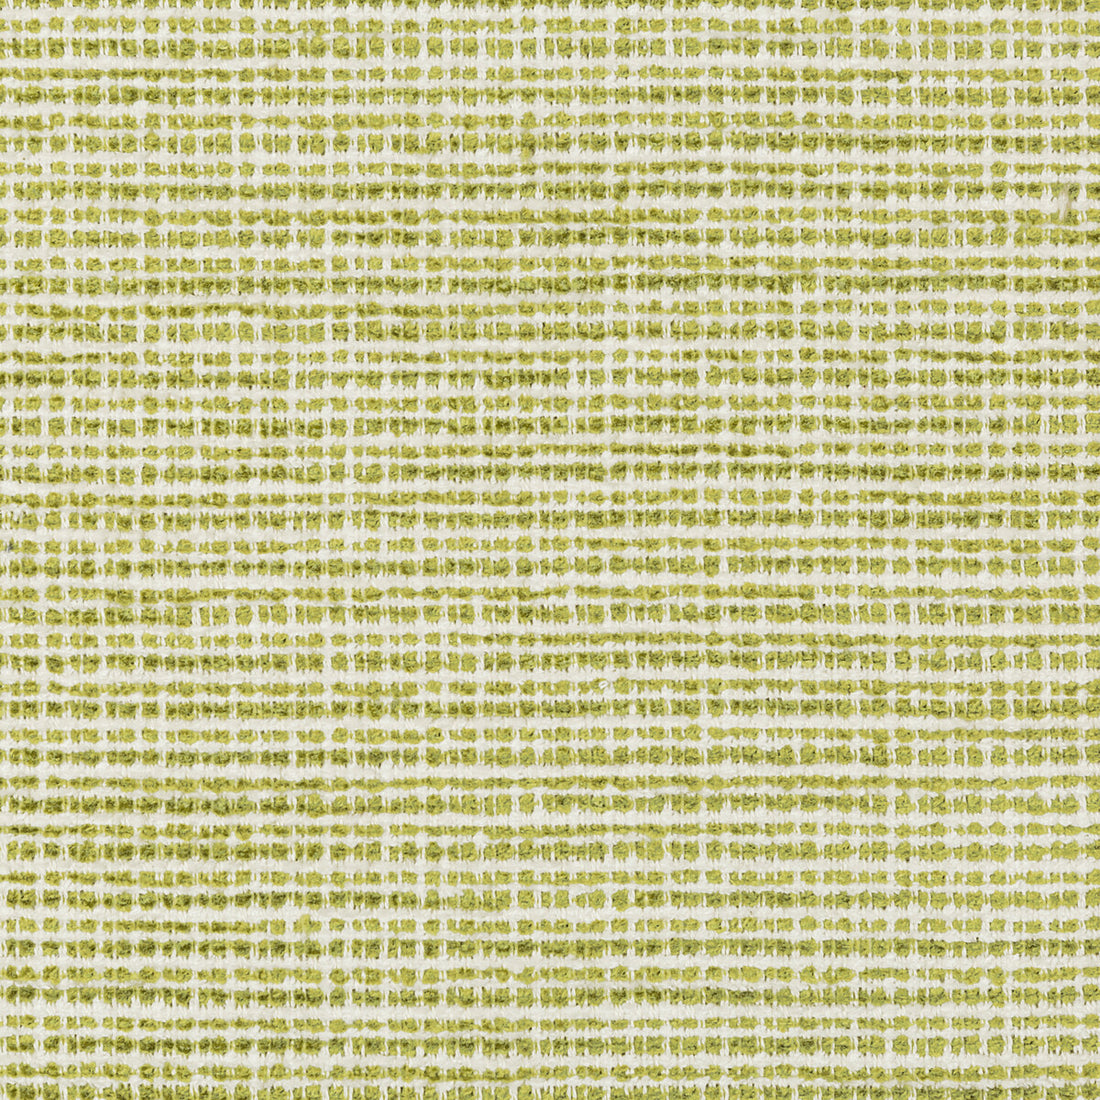 Freney Texture fabric in olive color - pattern 8019149.30.0 - by Brunschwig &amp; Fils in the Chambery Textures II collection